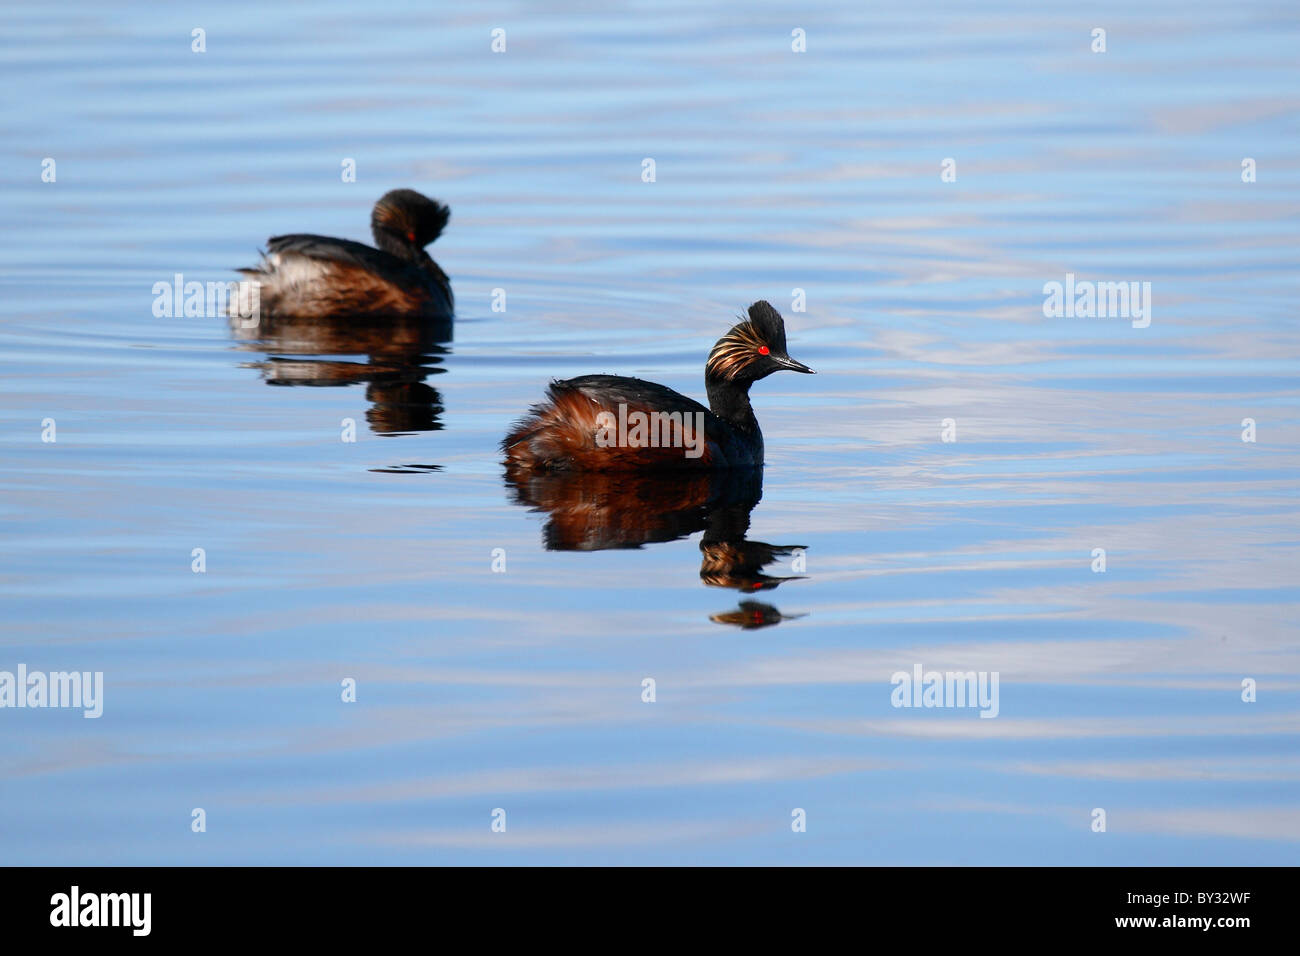 A pair of Eared Grebes on a lake. Stock Photo